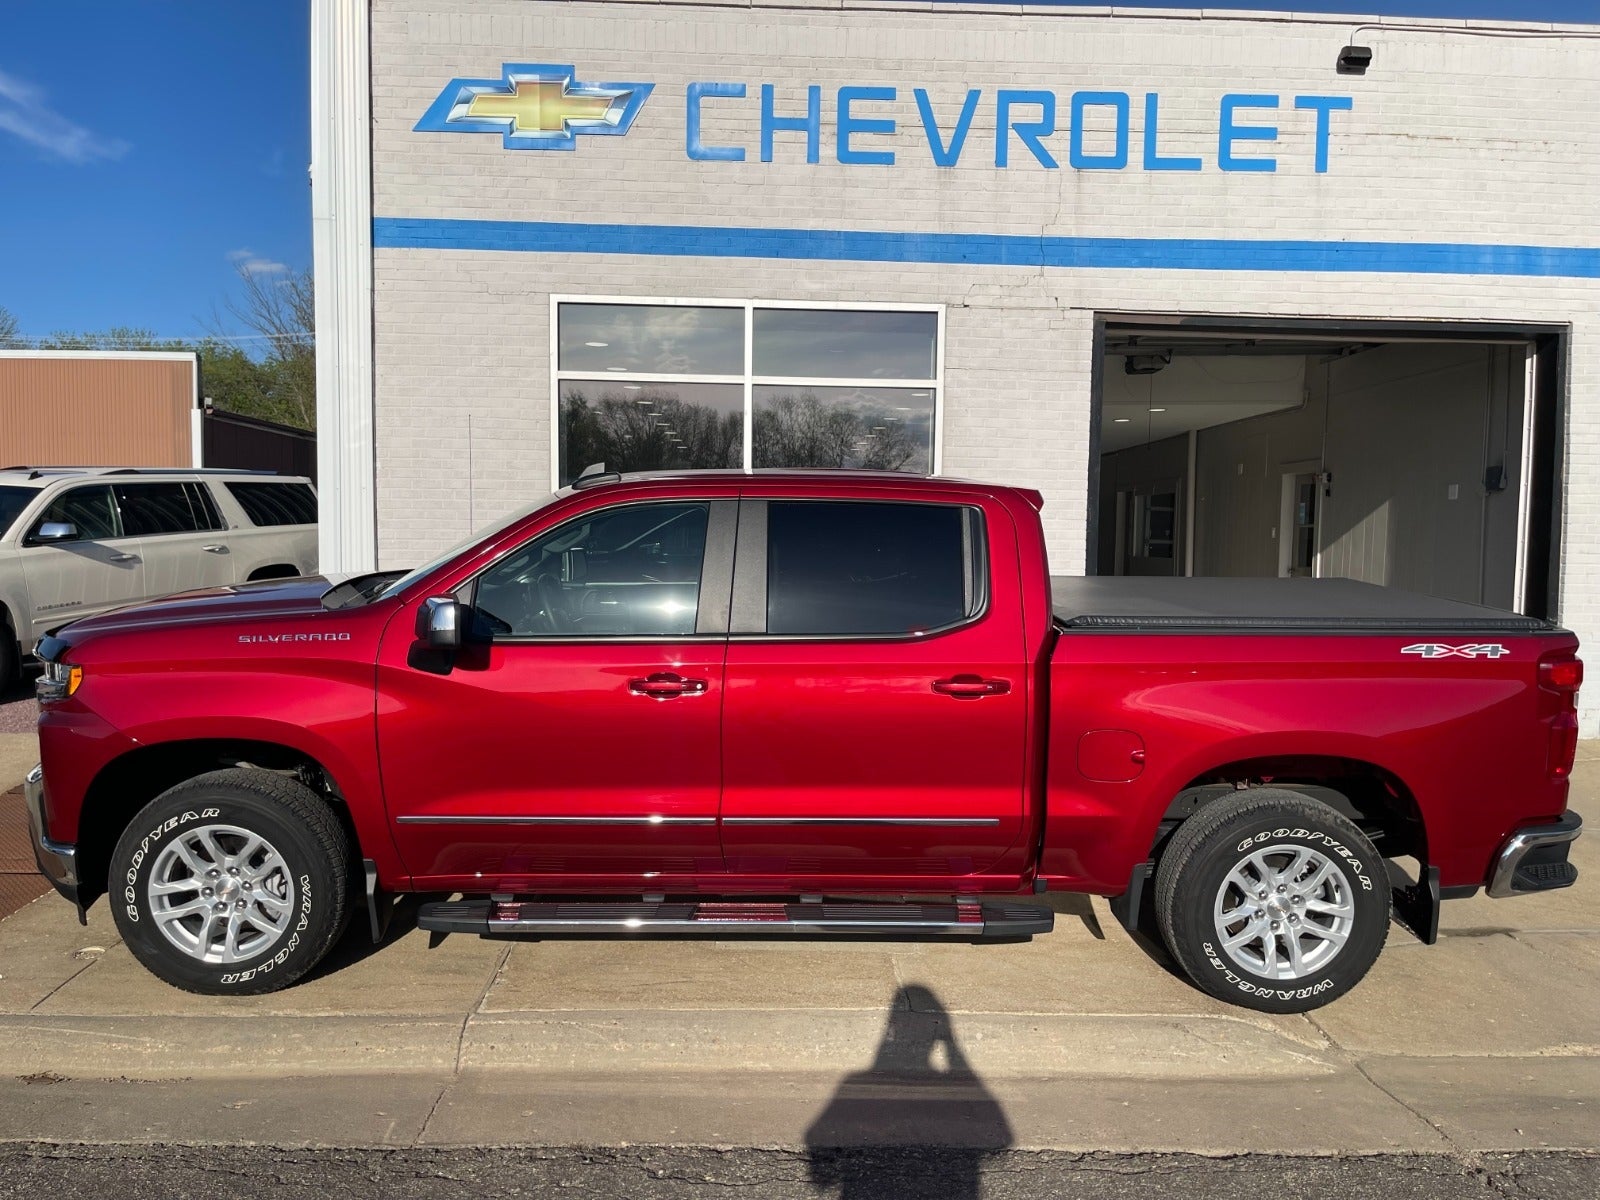 Used 2019 Chevrolet Silverado 1500 LT with VIN 1GCUYDED1KZ197613 for sale in Edgerton, Minnesota